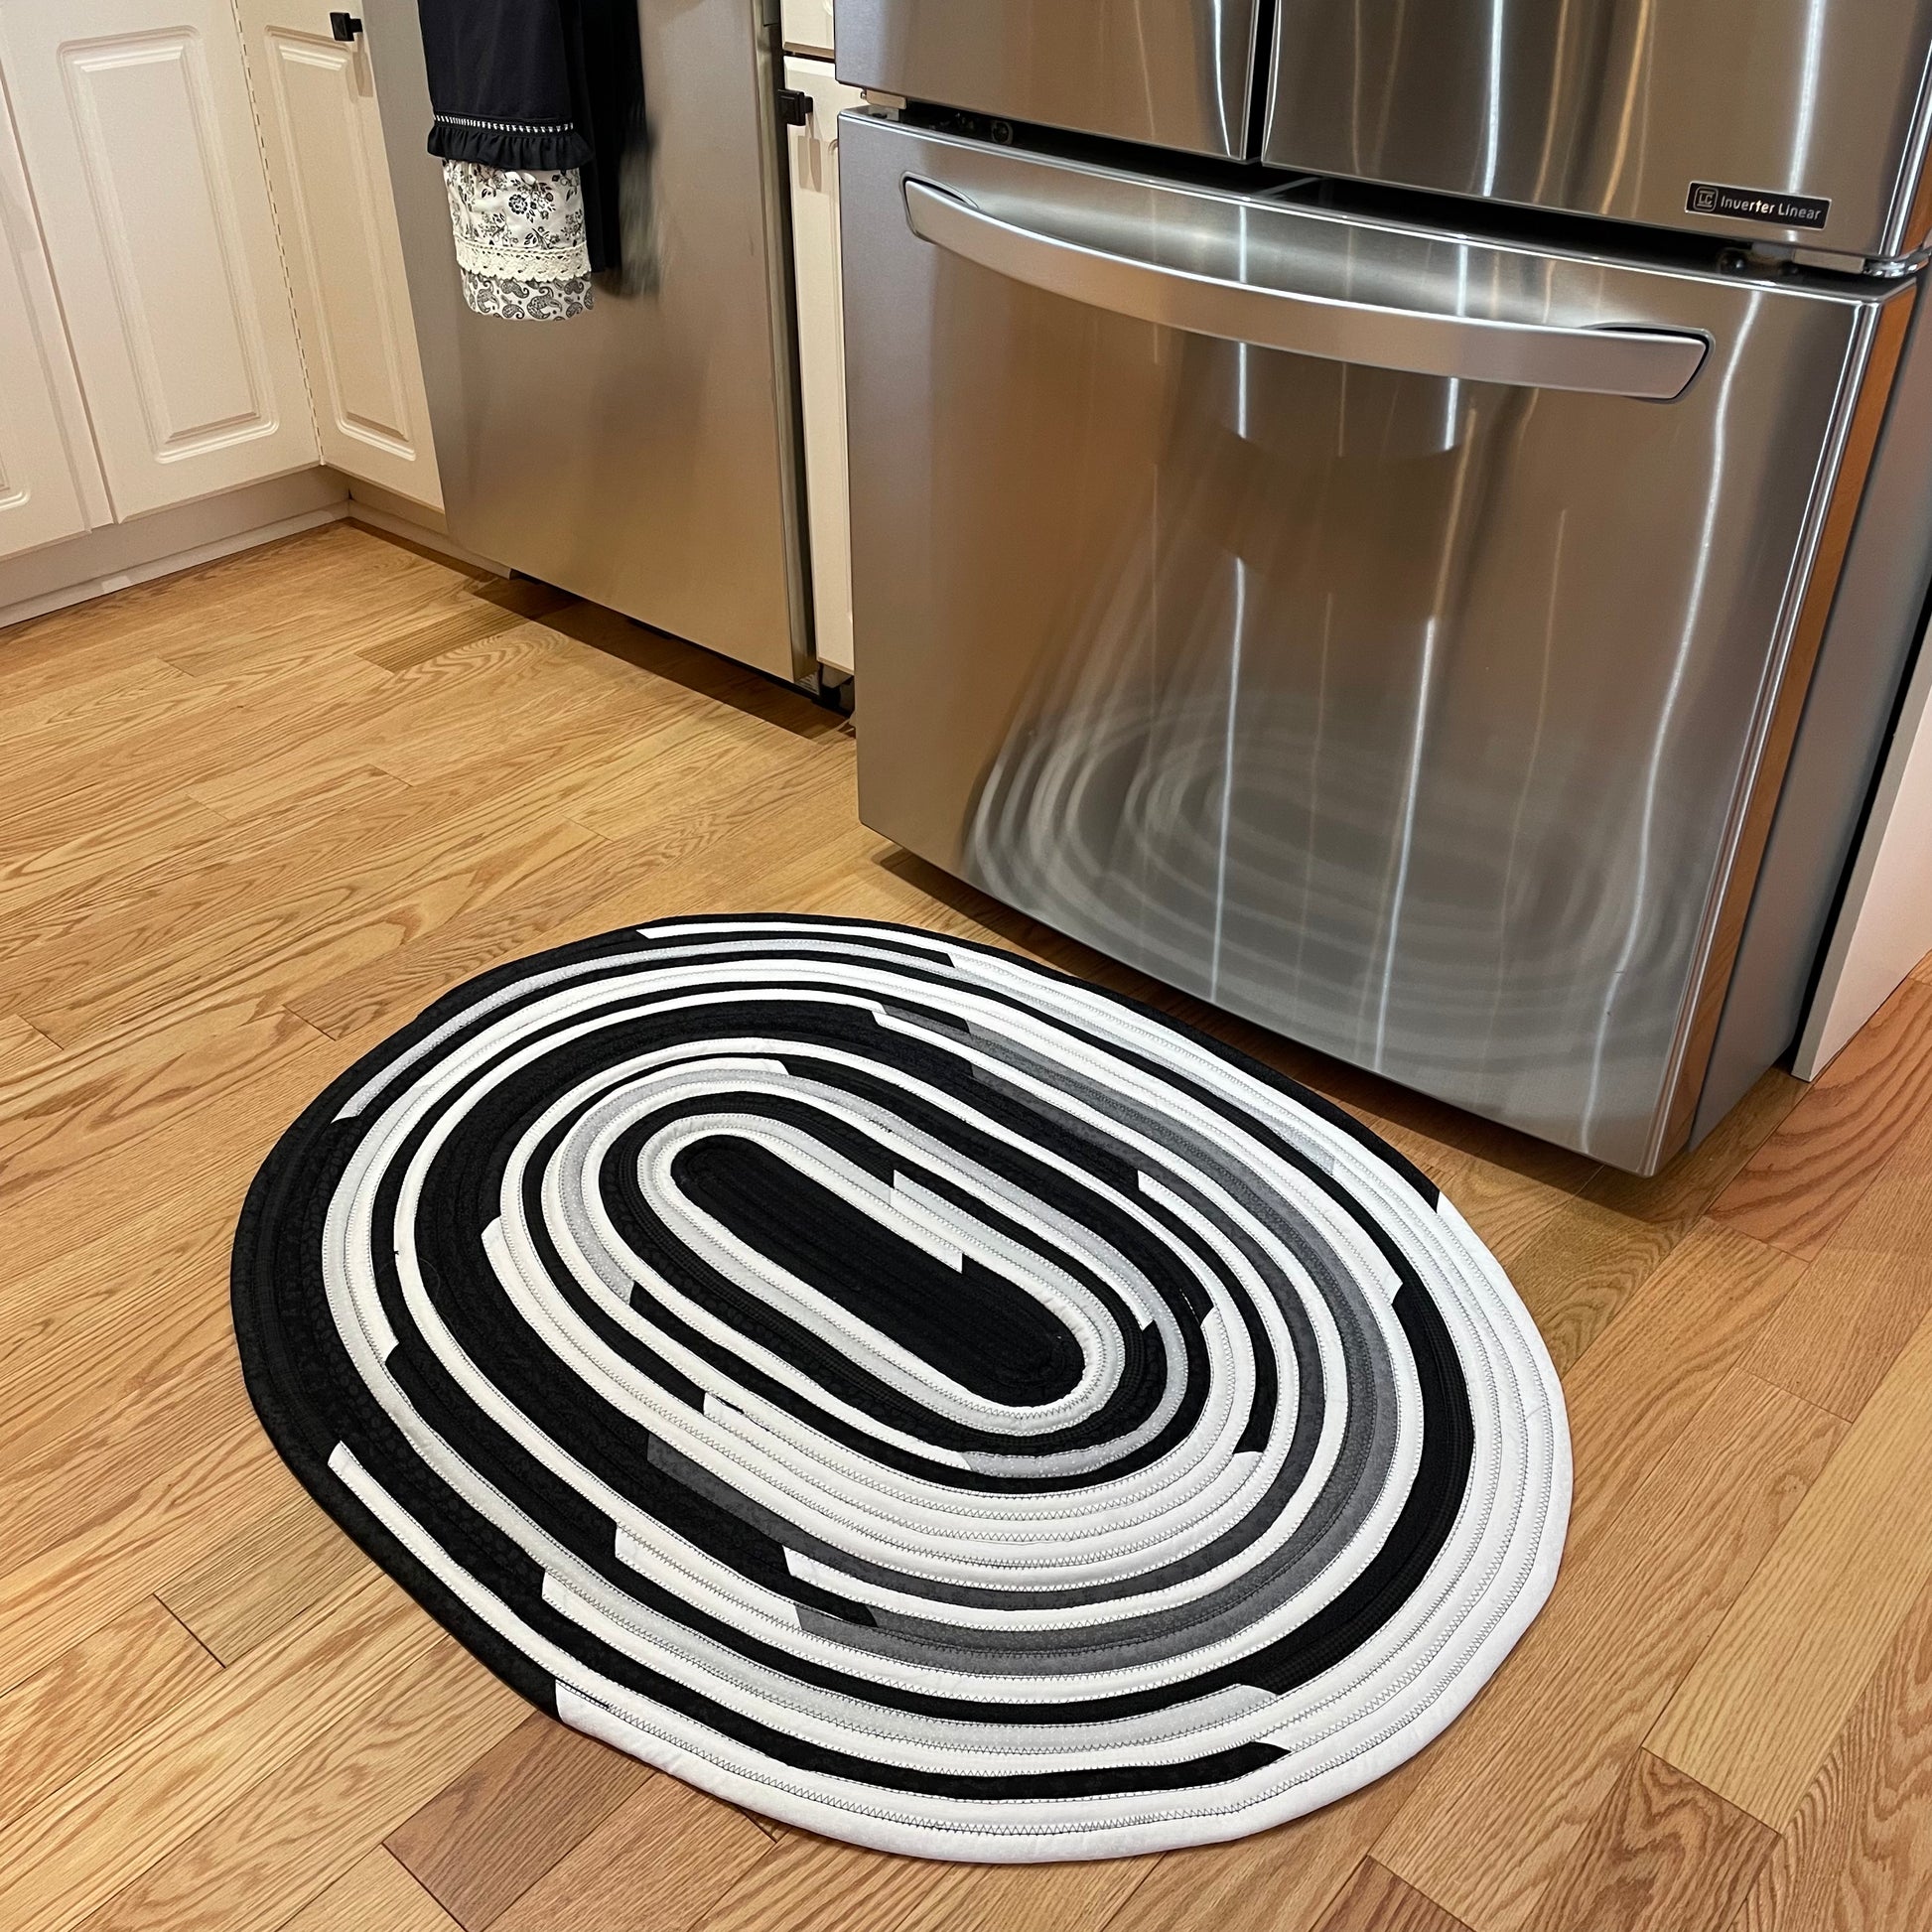 Handmade Kitchen Jelly Roll Rug. Featuring black, grey and white tones of quilting cotton. Washable and durable this rug will last for years. Handmade in Canada by Home Stitchery Decor